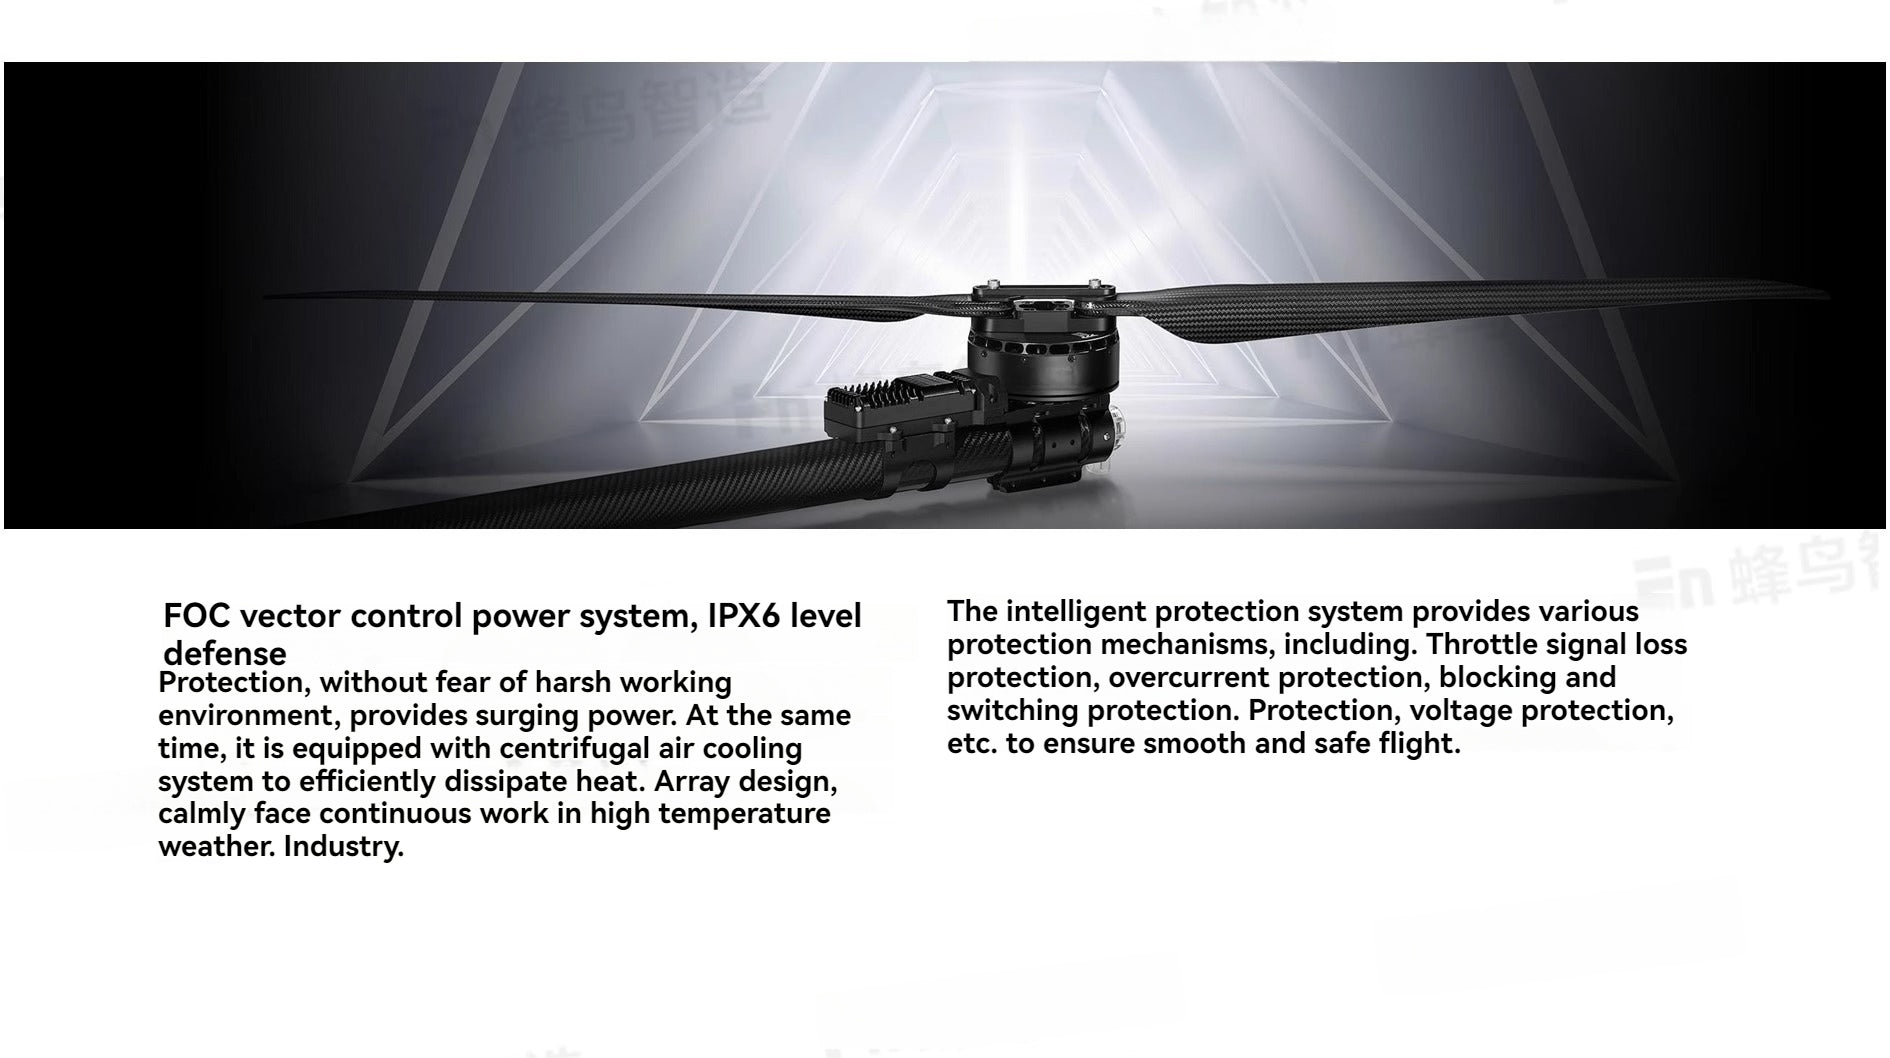 RCDrone, 3 FOC vector control power system, IPX6 level The intelligent protection system provides various defense